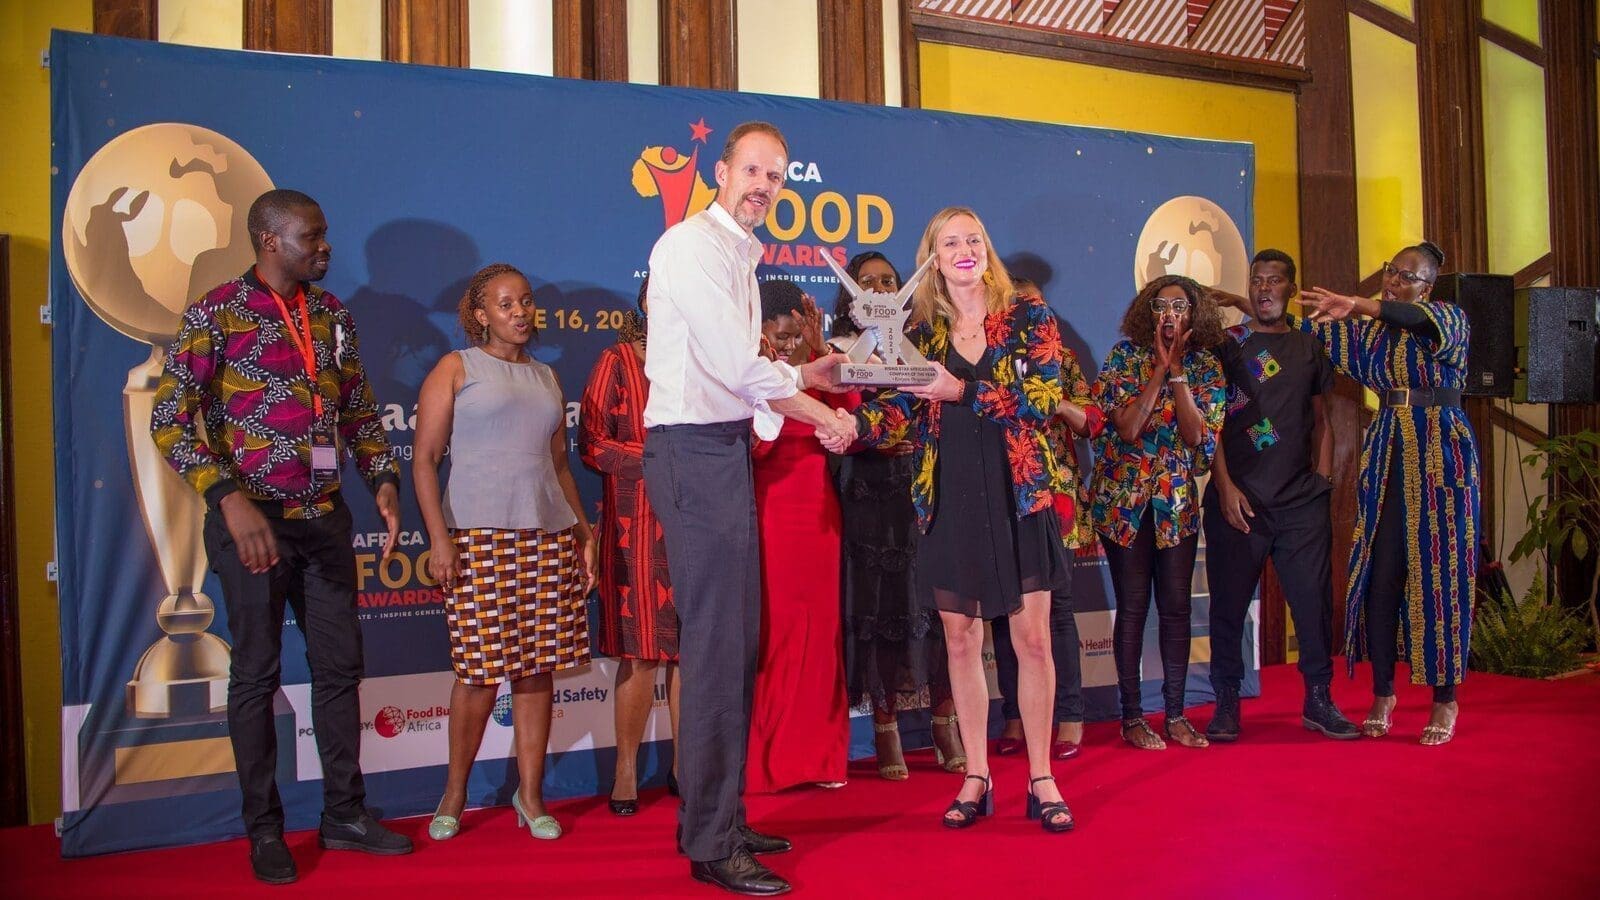 African Originals recognized as Rising Star African Food Company of the Year in Africa